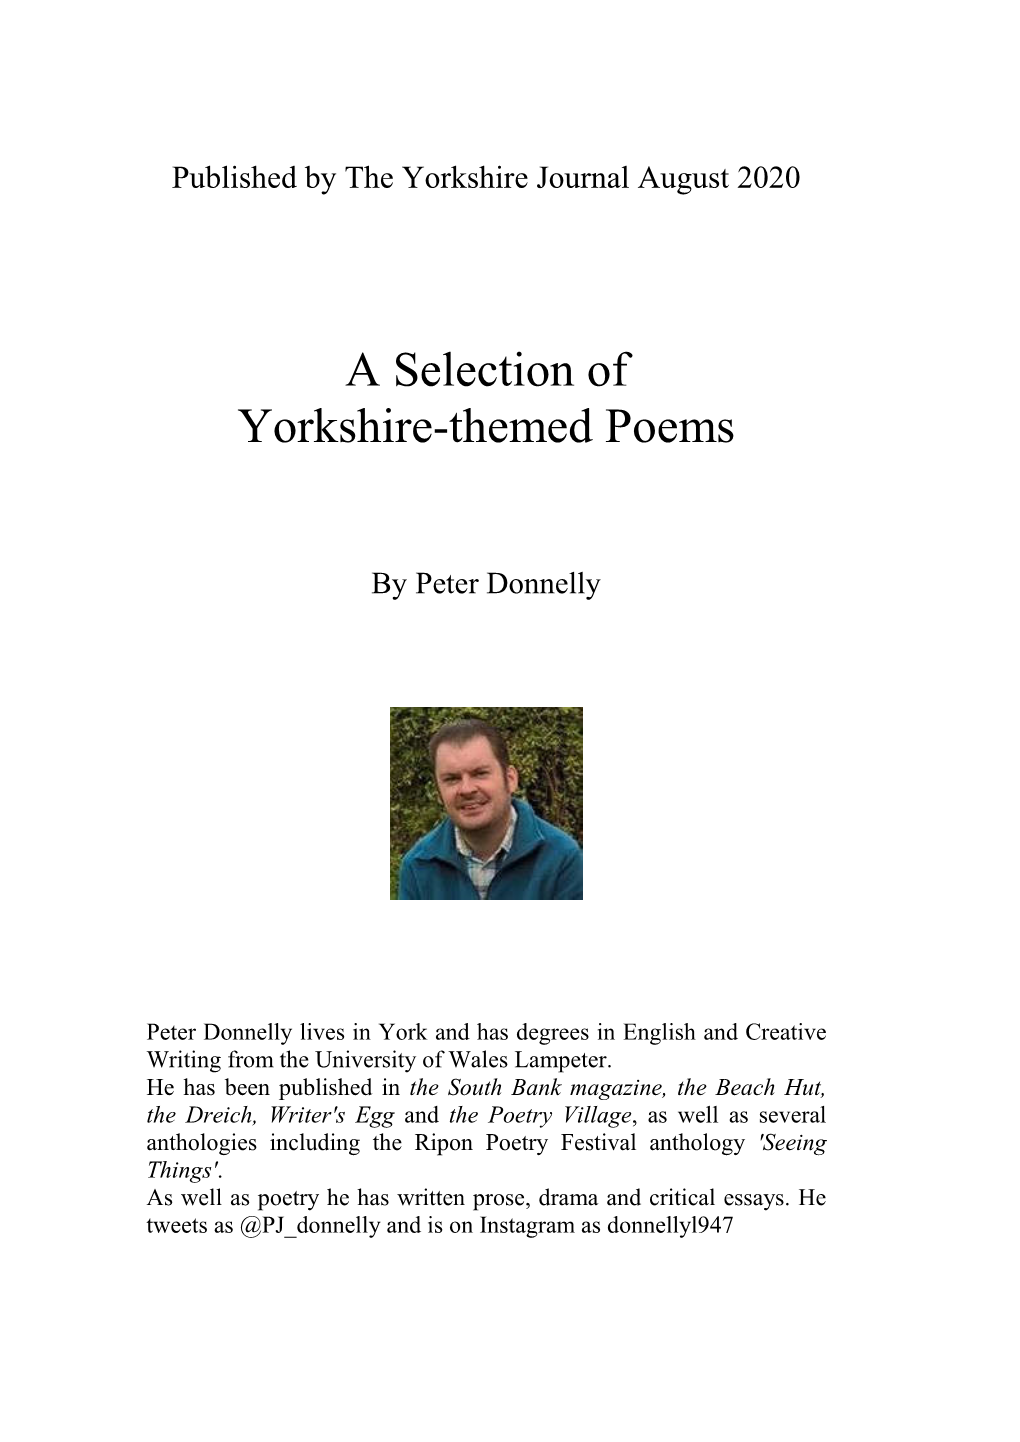 A Selection of Yorkshire-Themed Poems